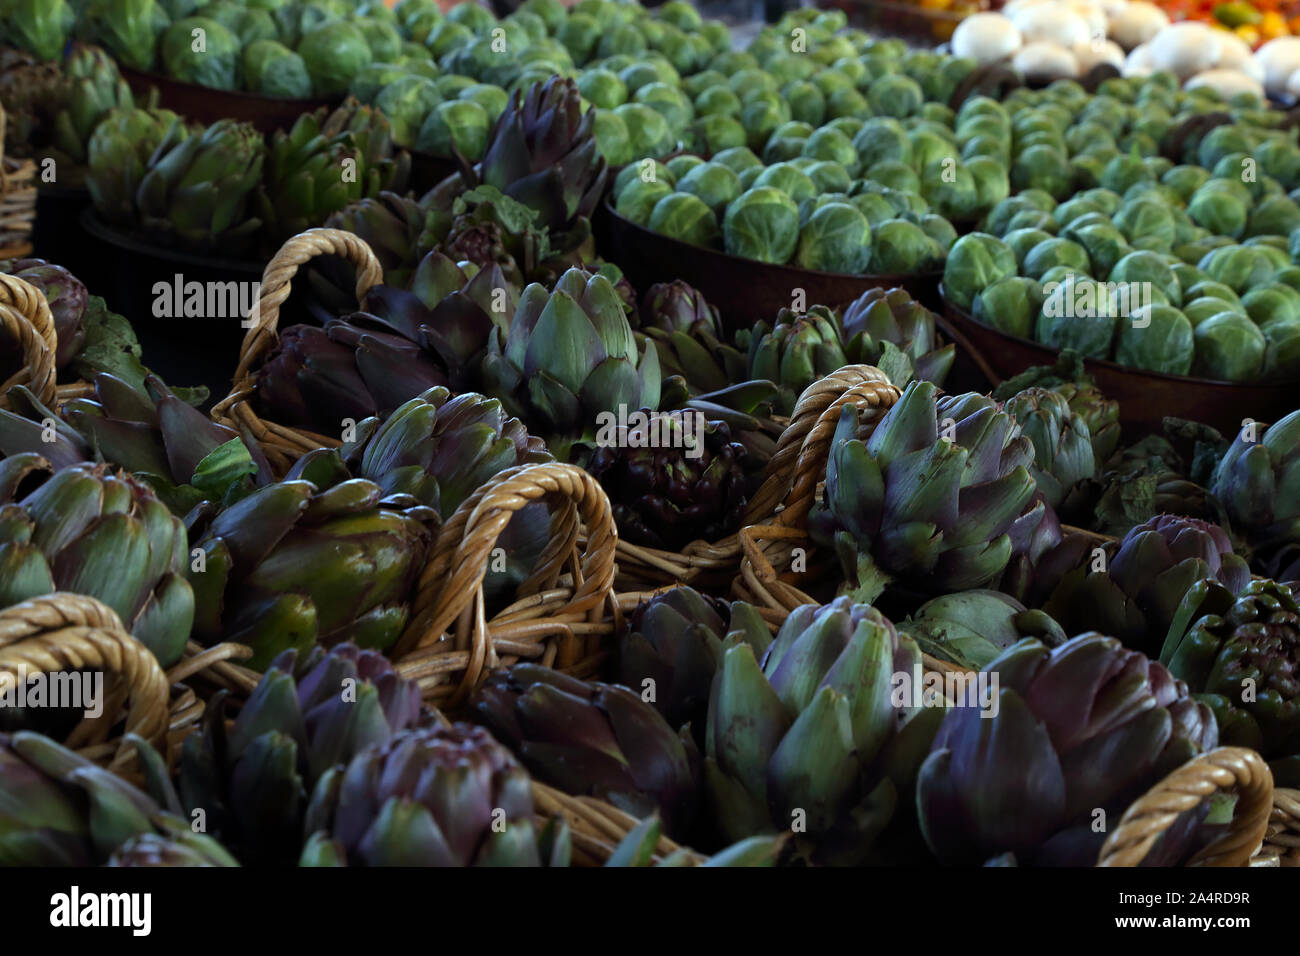 Biologic, natural cultivated artichoke, on a market counter. Vegetables from the farmers market. Ecologic products. Natural background. Stock Photo